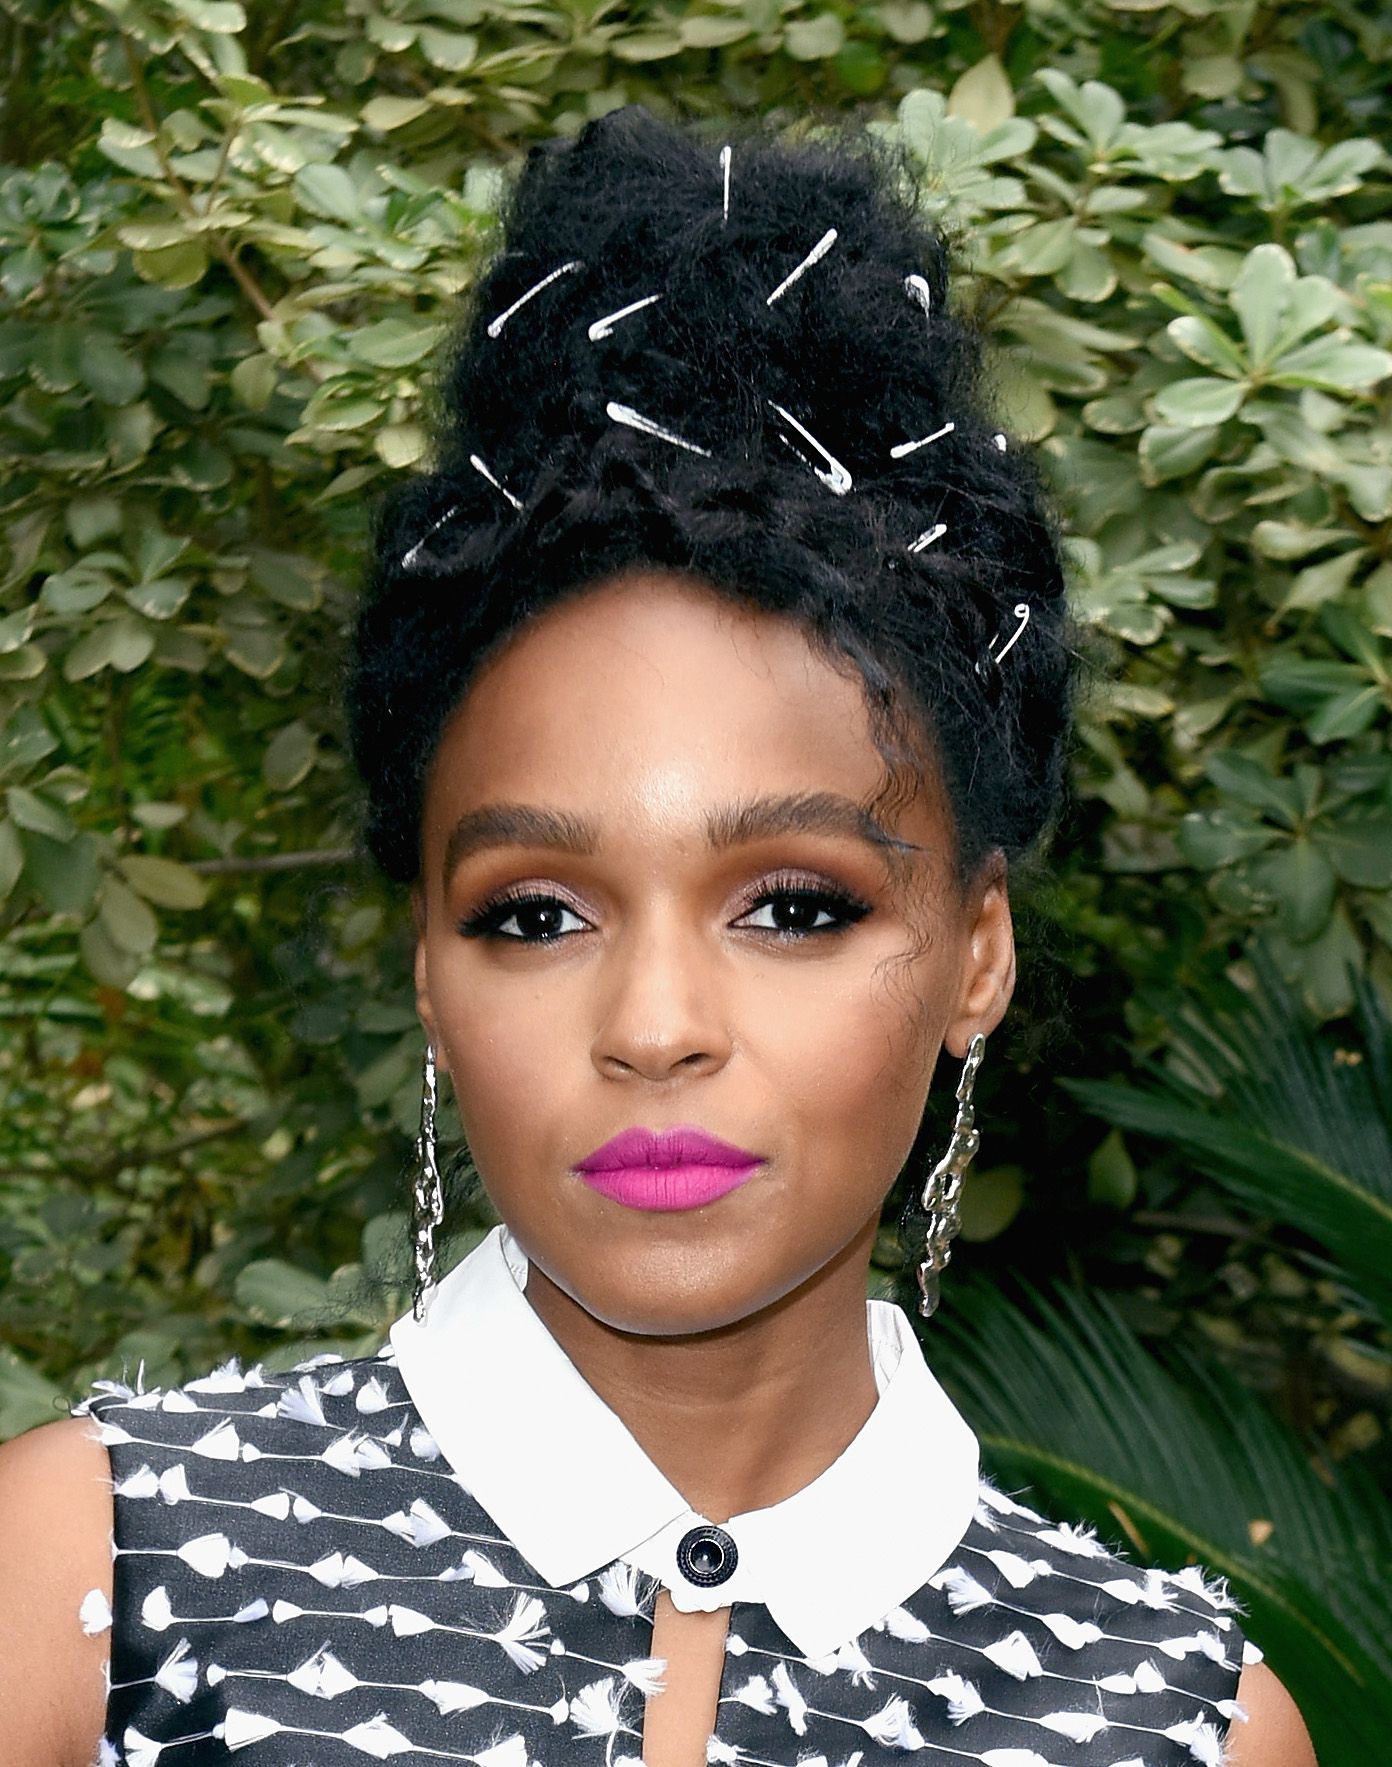 Janelle Monáe hairstyles - Janelle Monáe hair accessories